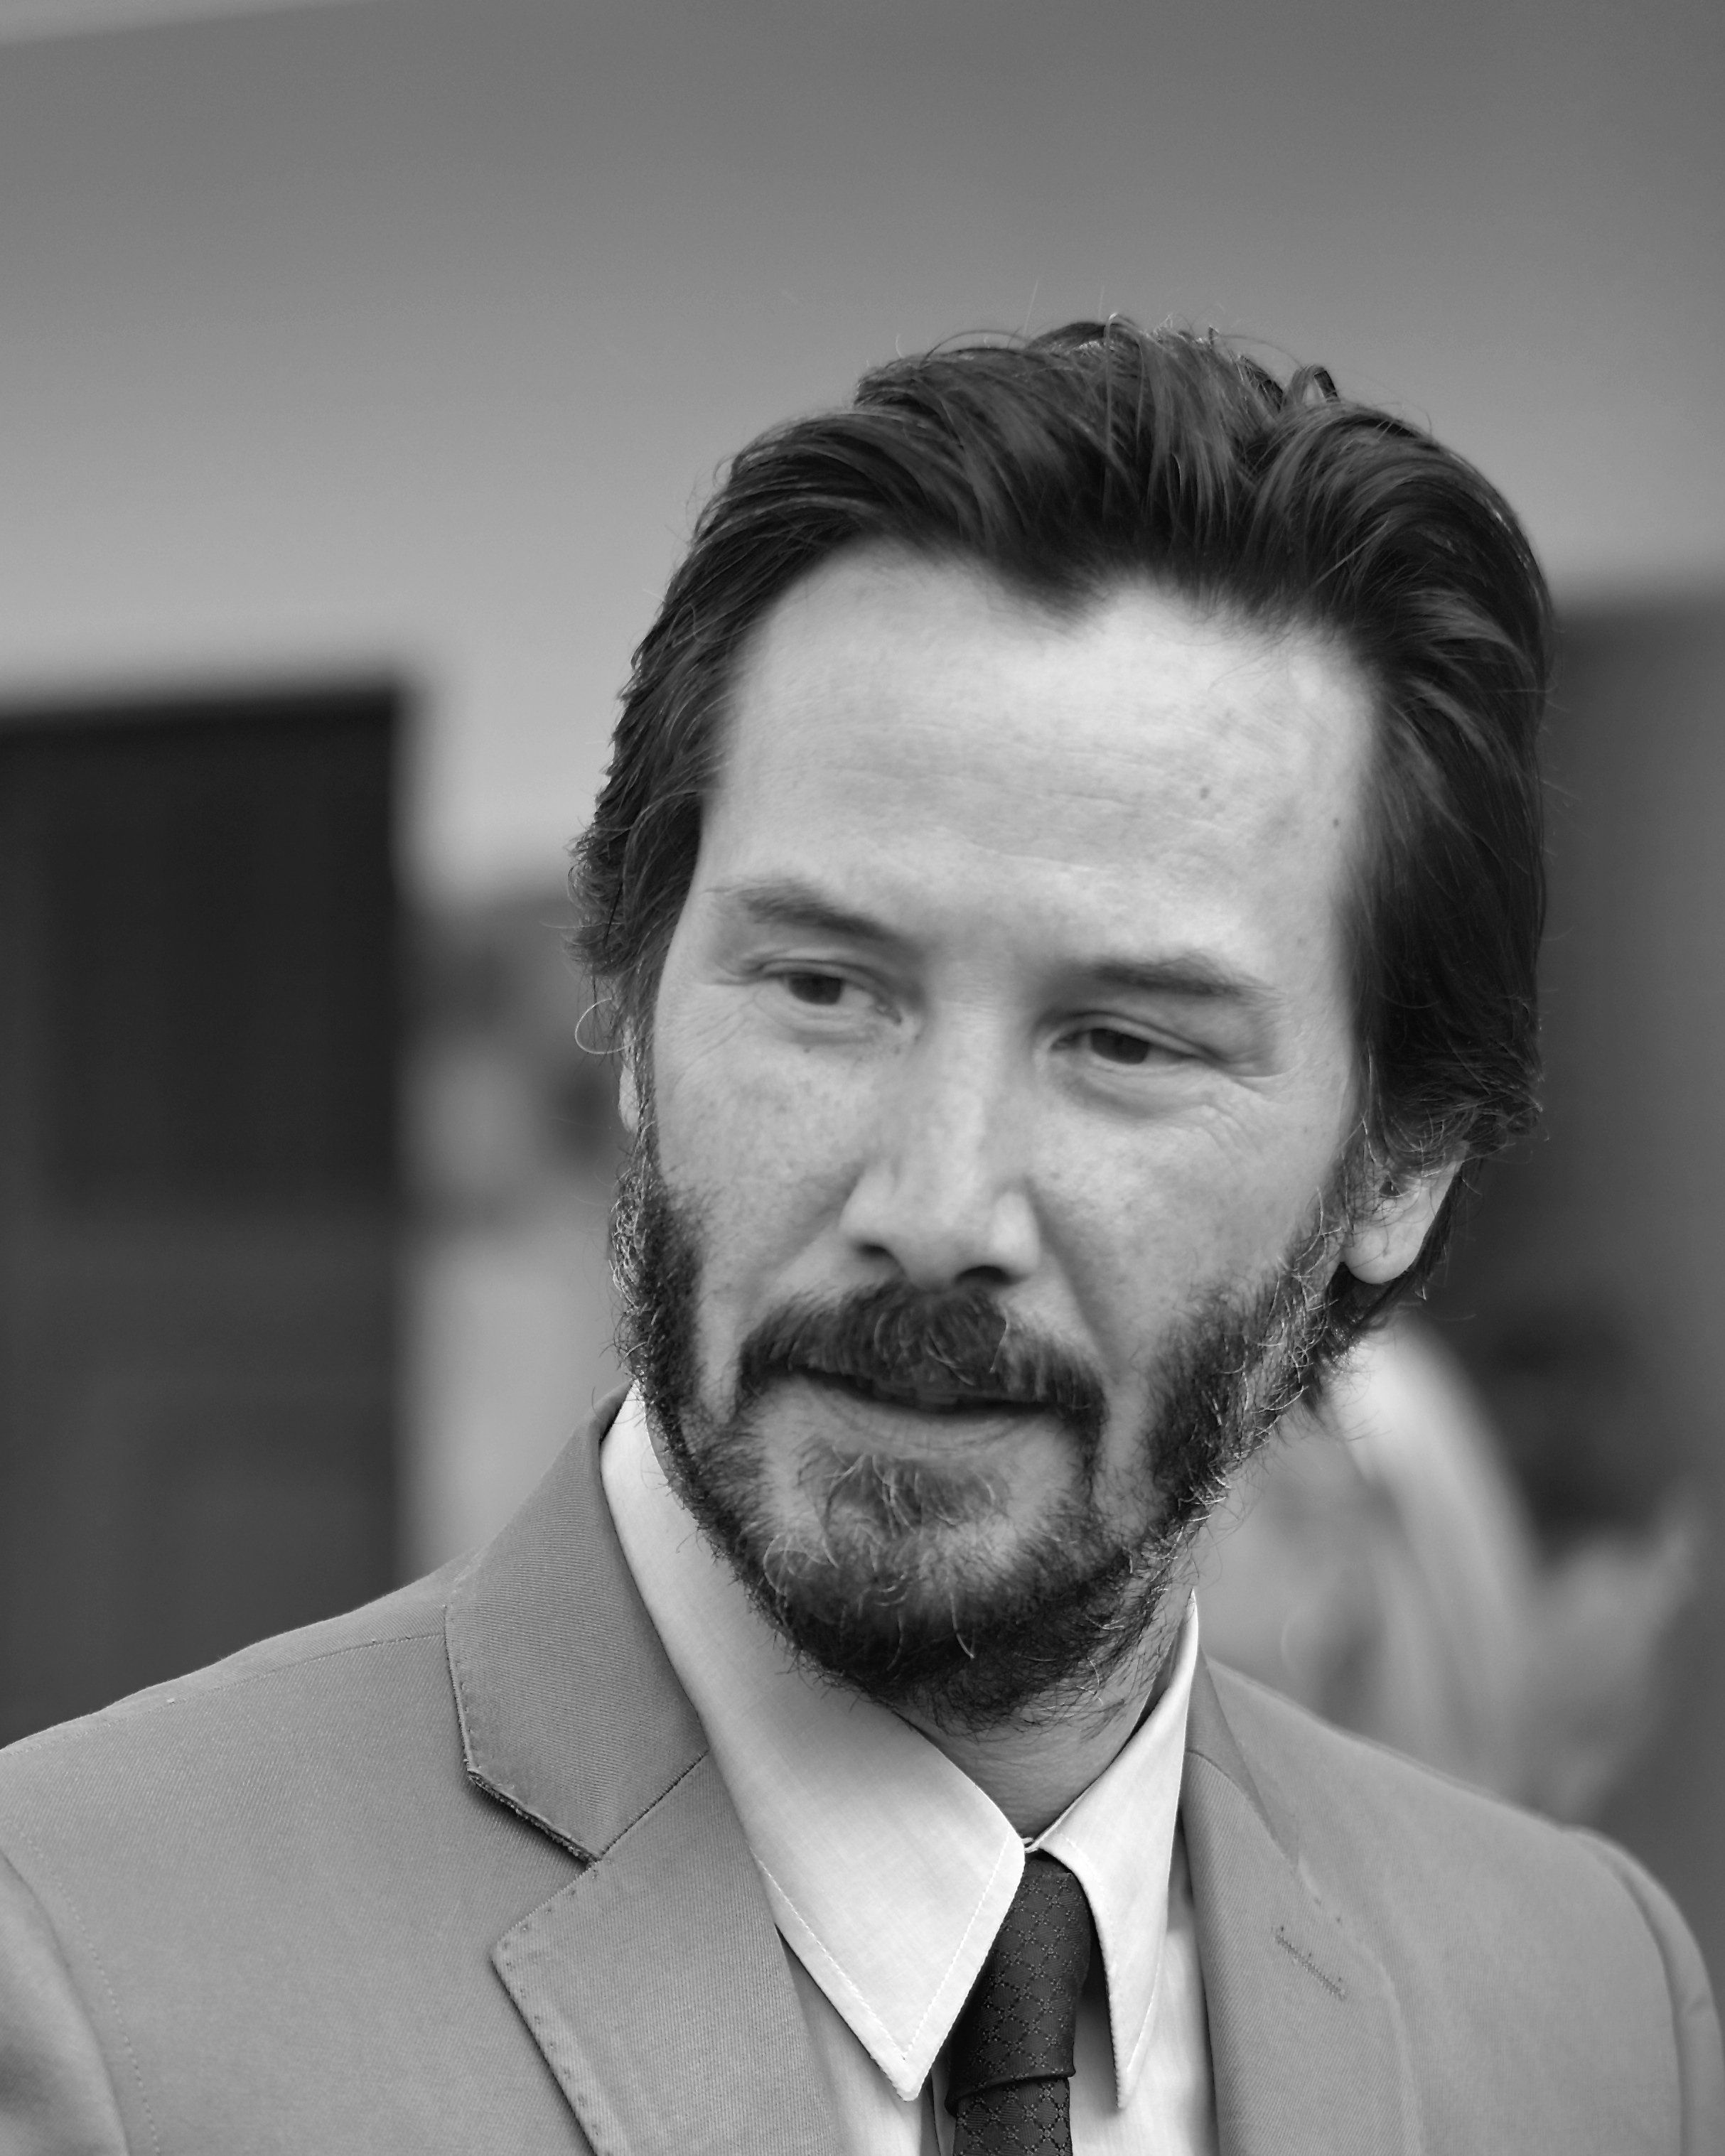 This is Keanu Reeves - The One